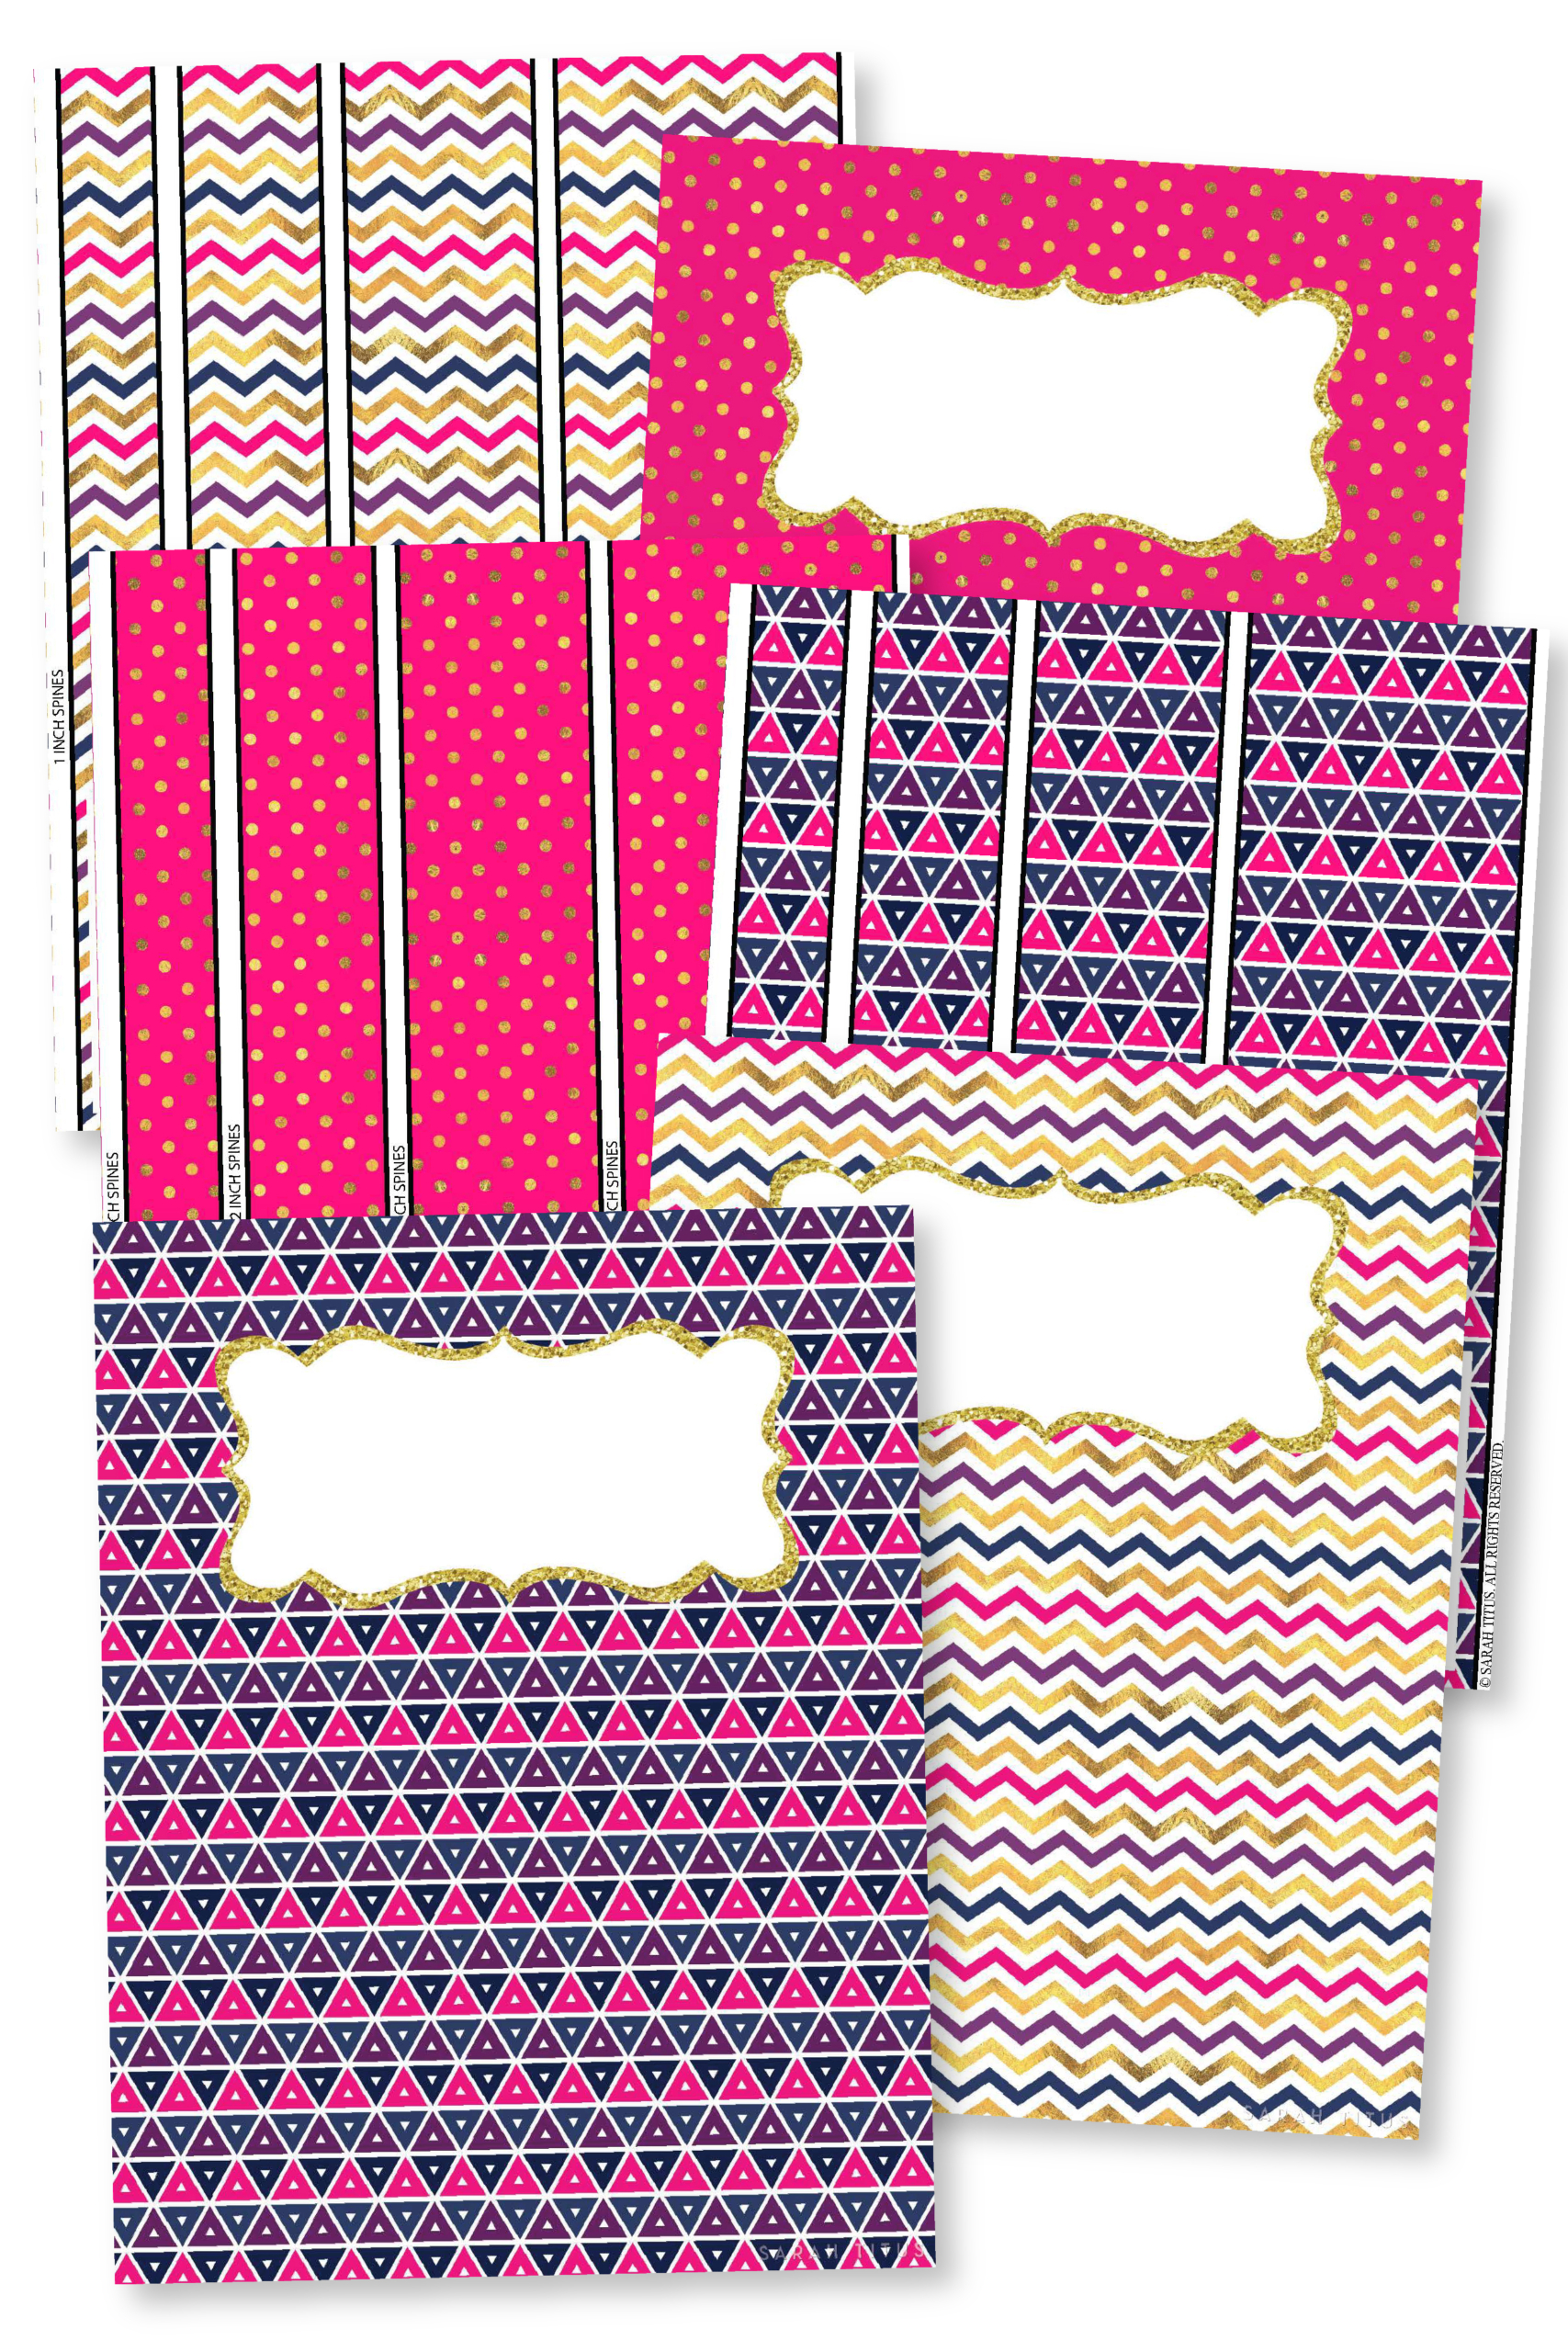 Binder Covers-01